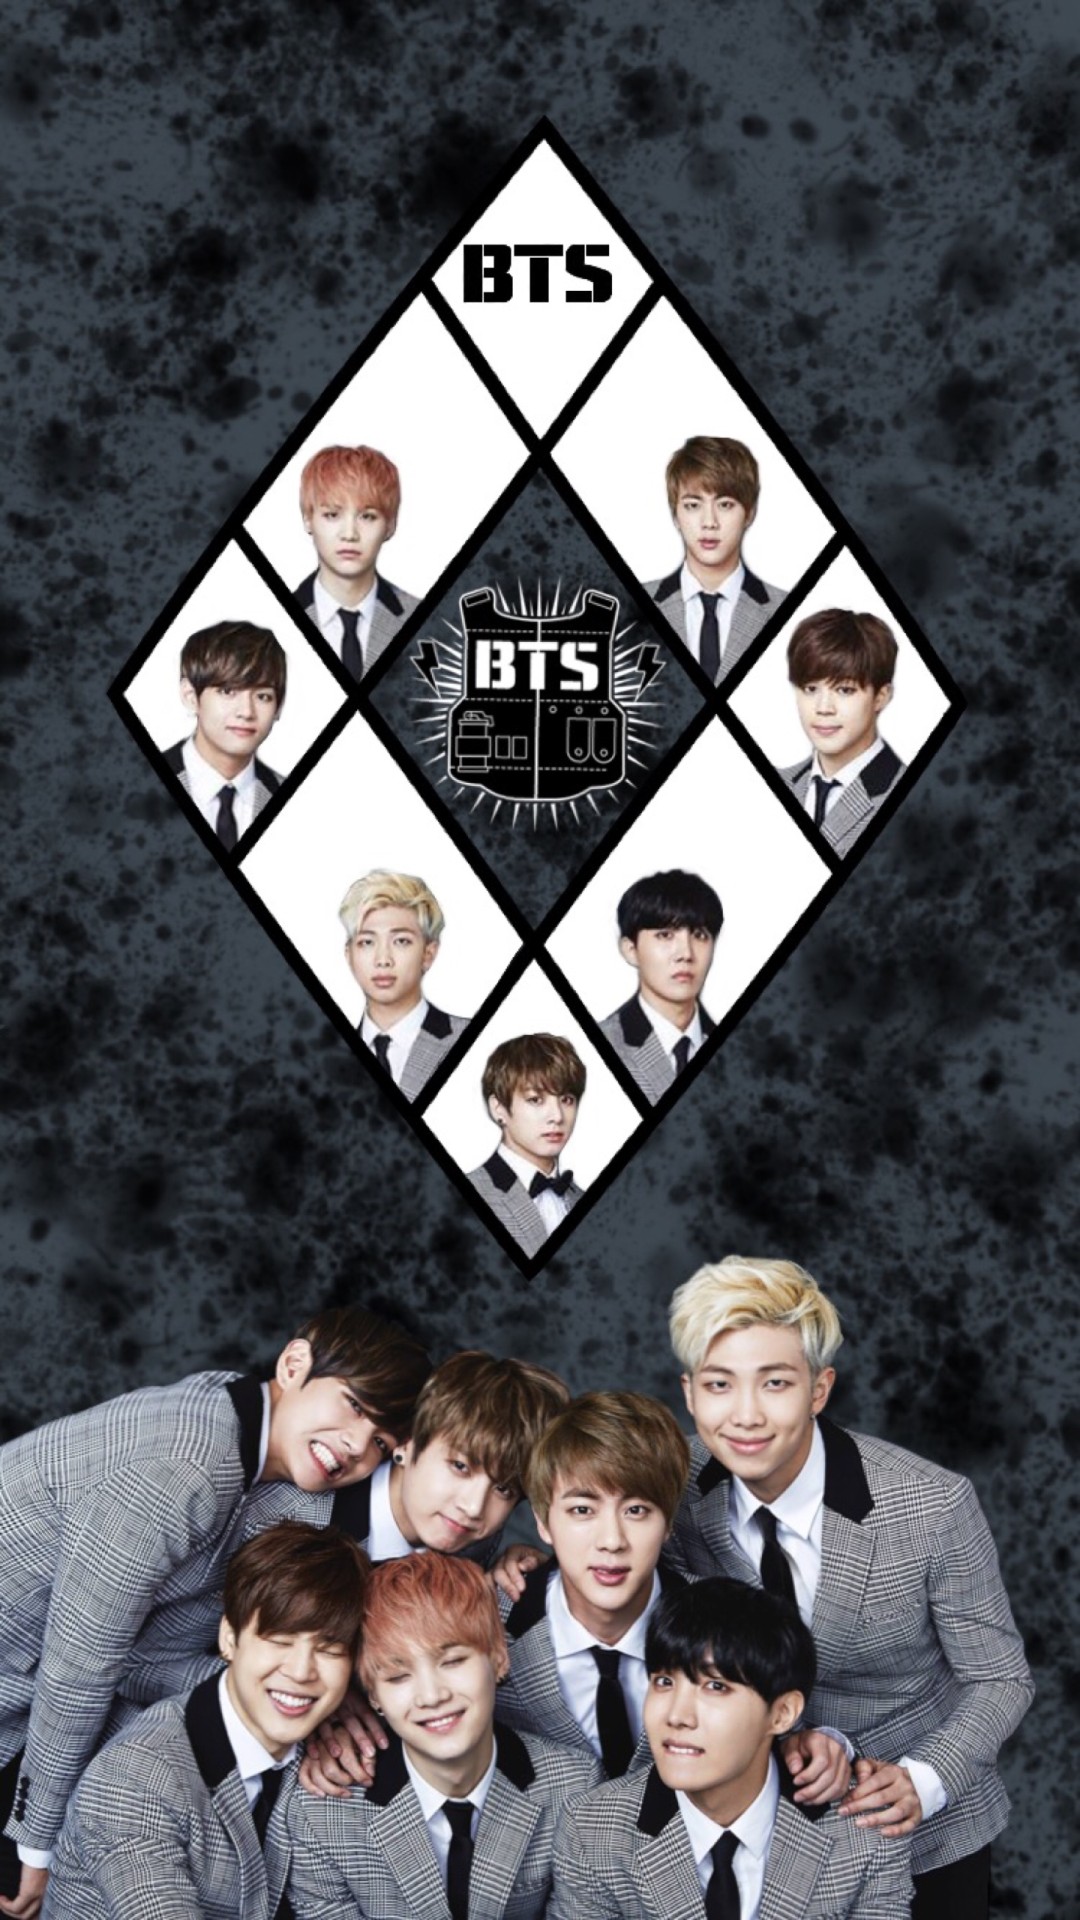 BTS wallpaper ·① Download free beautiful High Resolution wallpapers for